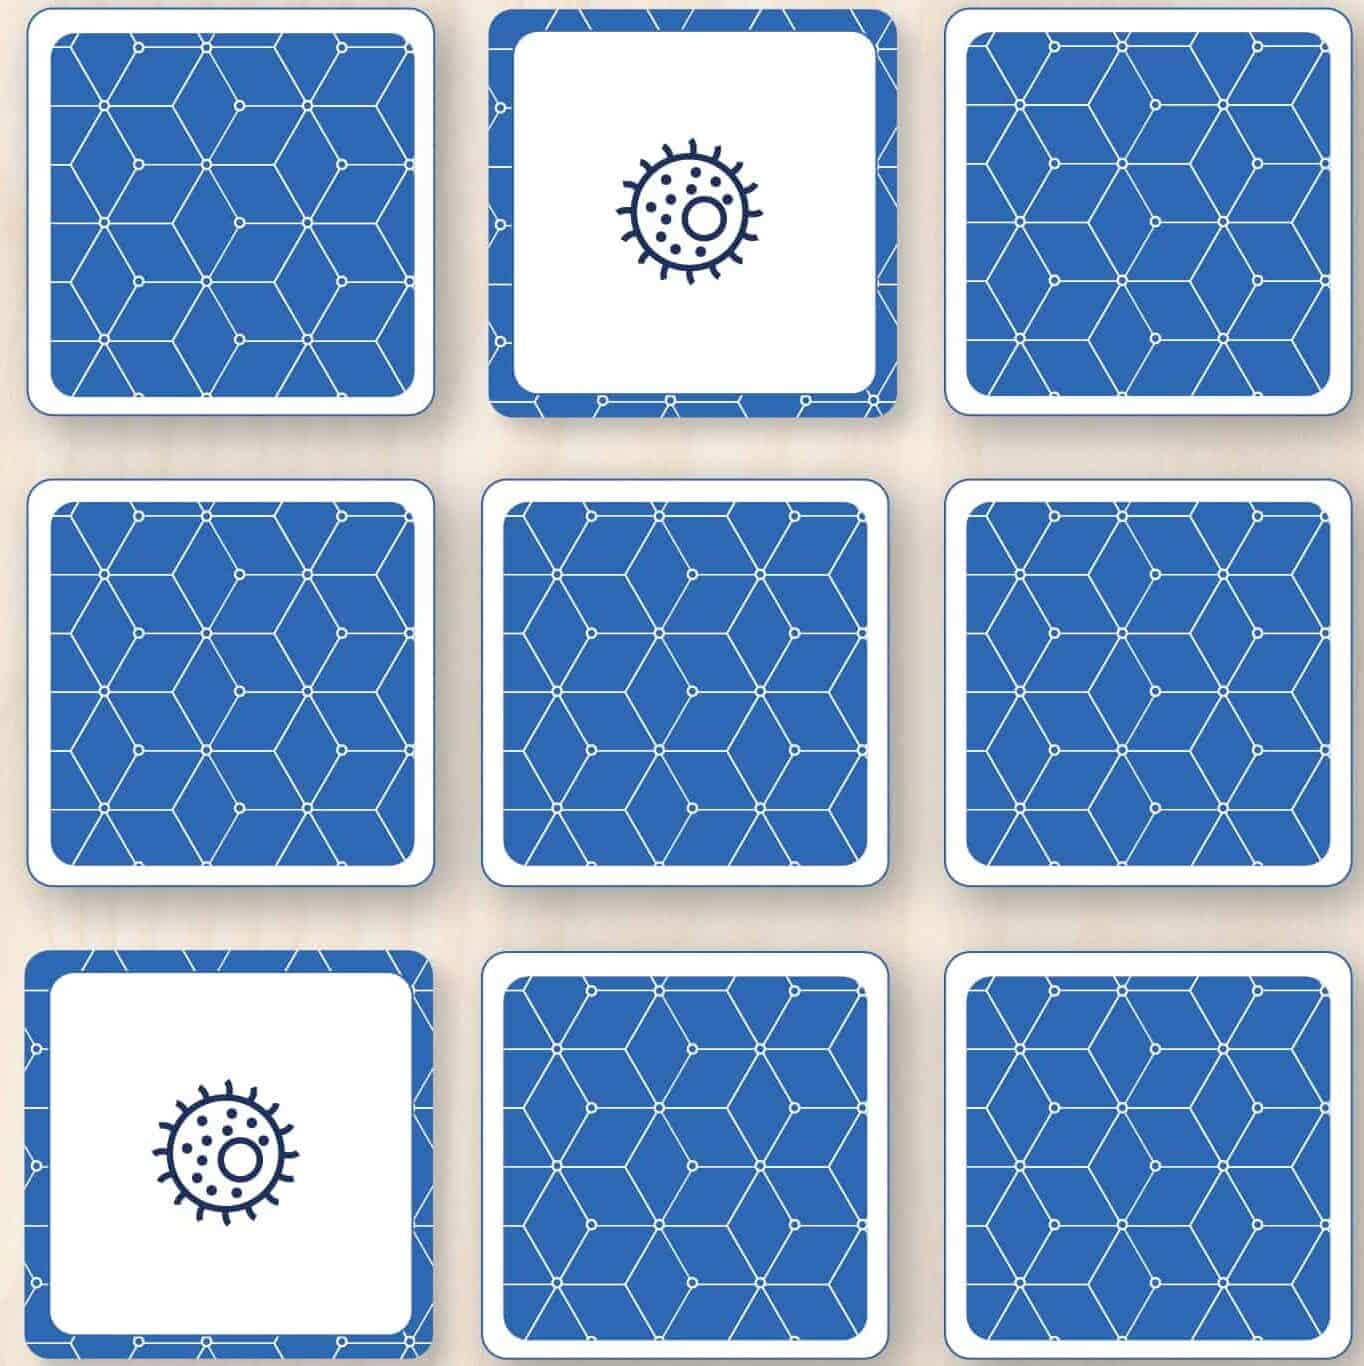 Illustration of "Memory" card game